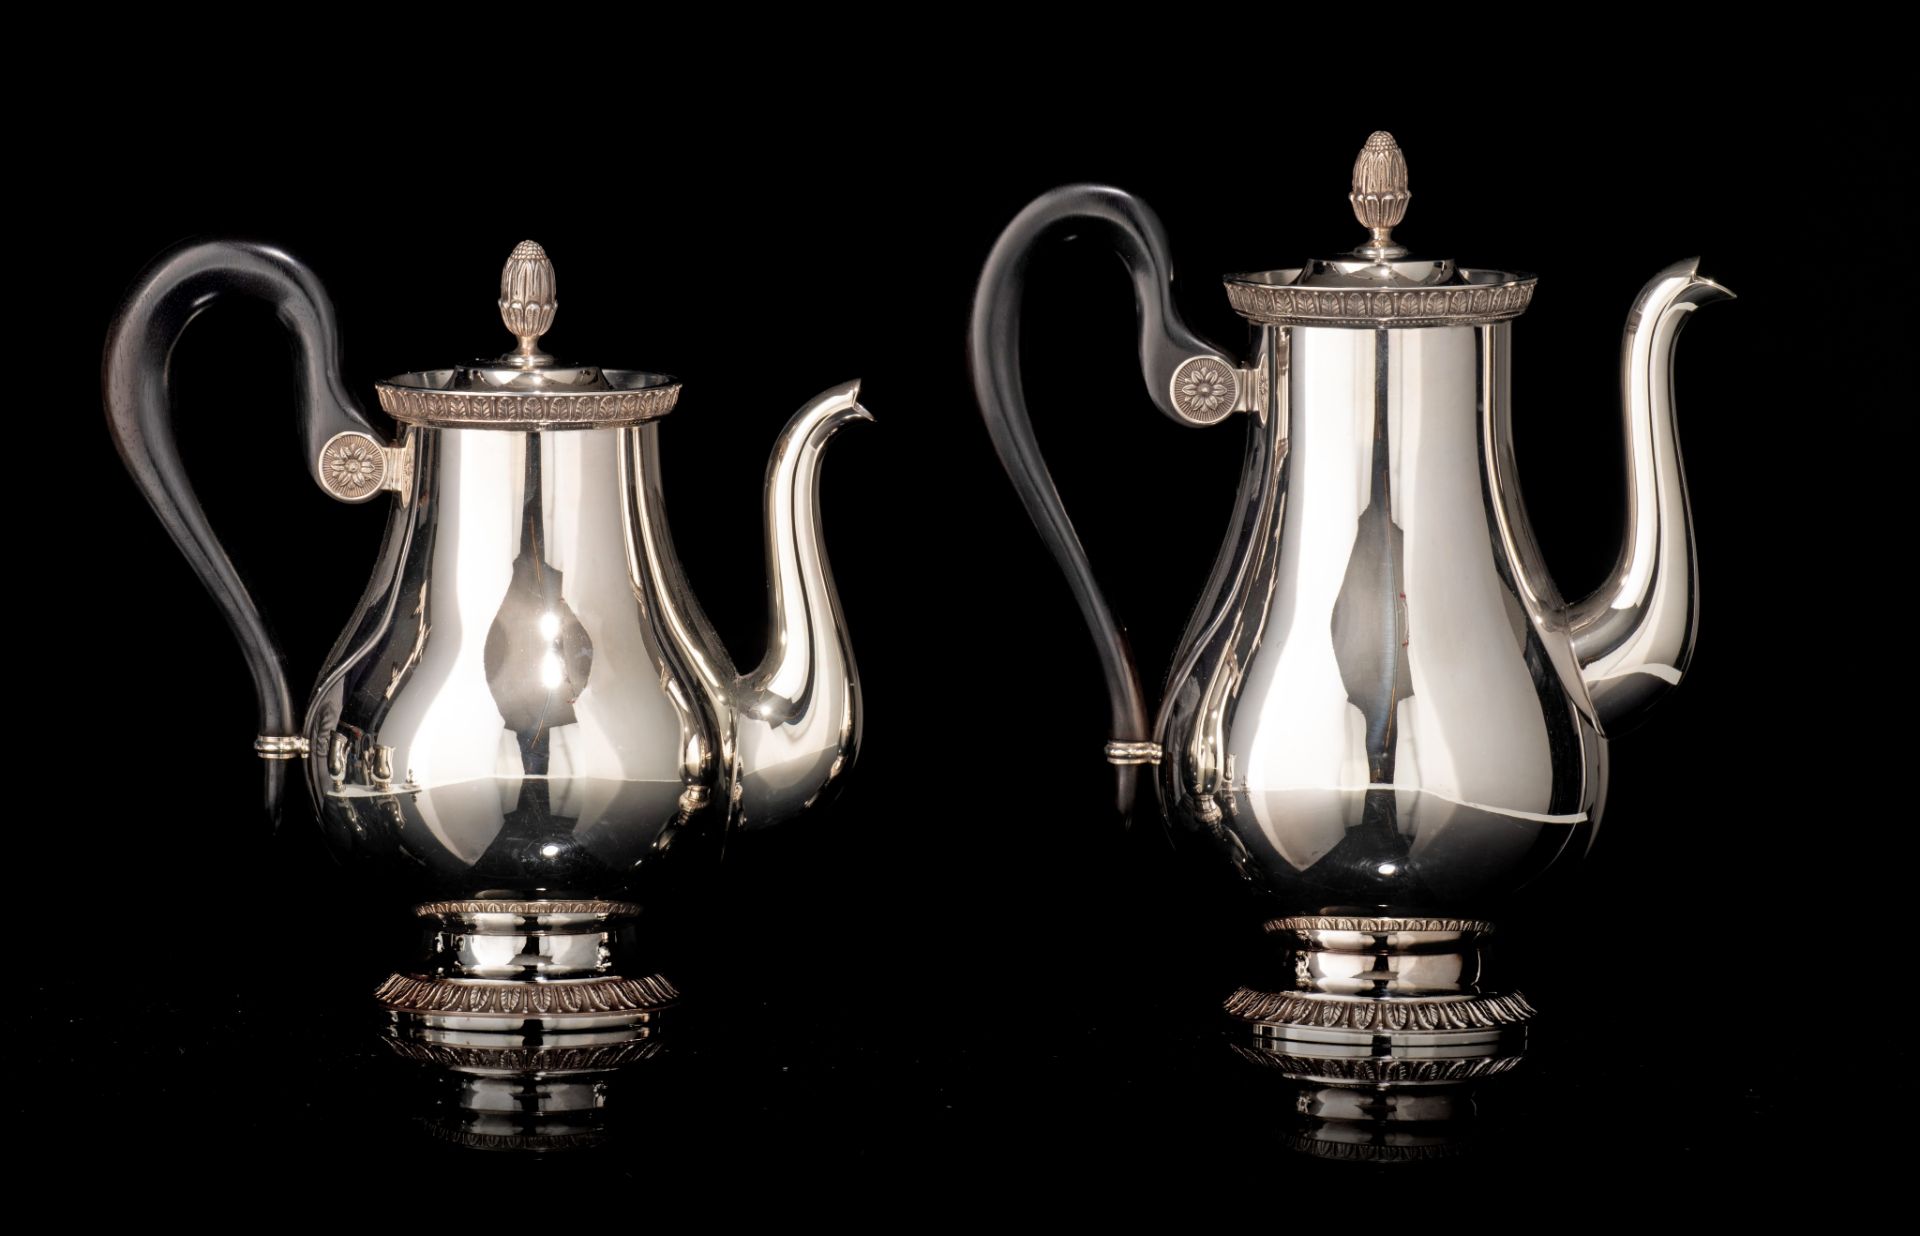 An interesting collection of silver-plated items by Christofle - France, model Malmaison - Image 2 of 16